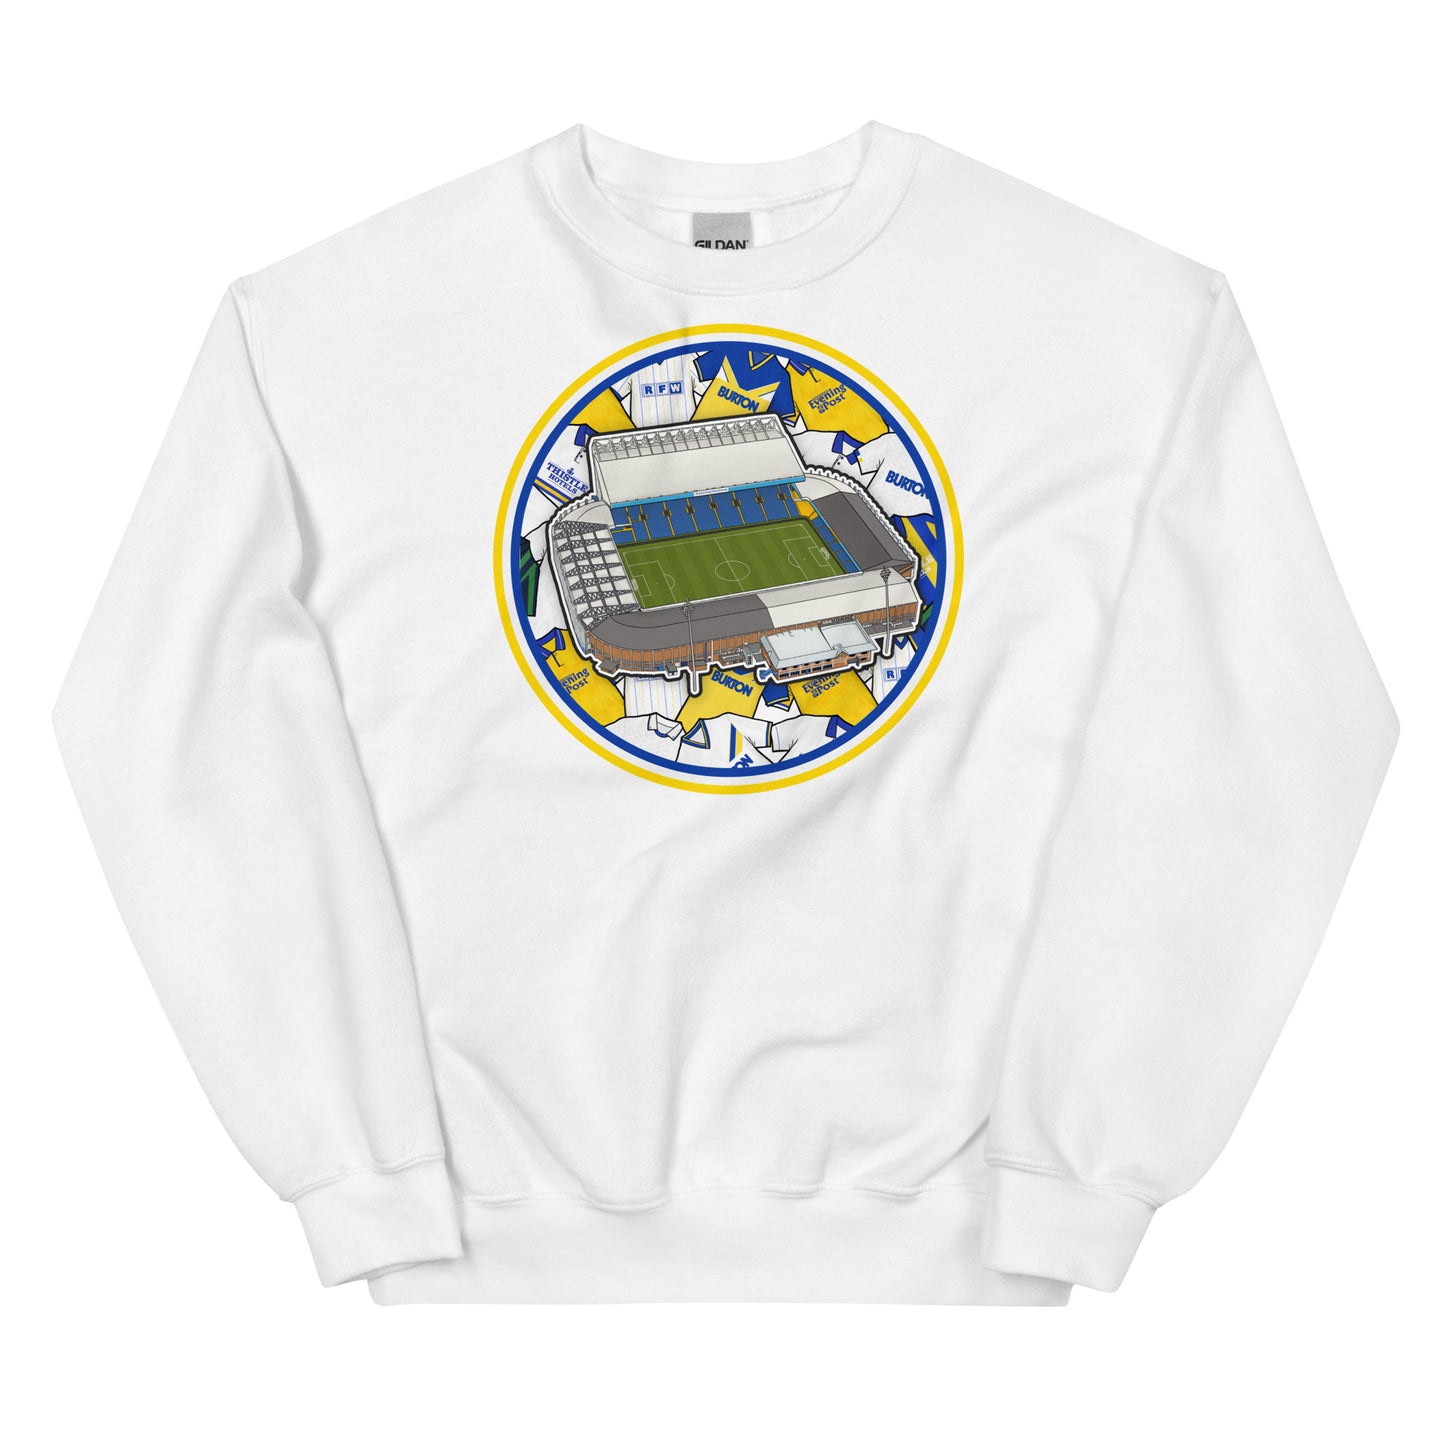 White Sweatshirt Inspired by the home of Leeds United in West Yorkshire, Elland Road Stadium with Retro Themed Illustrated Artwork Behind it